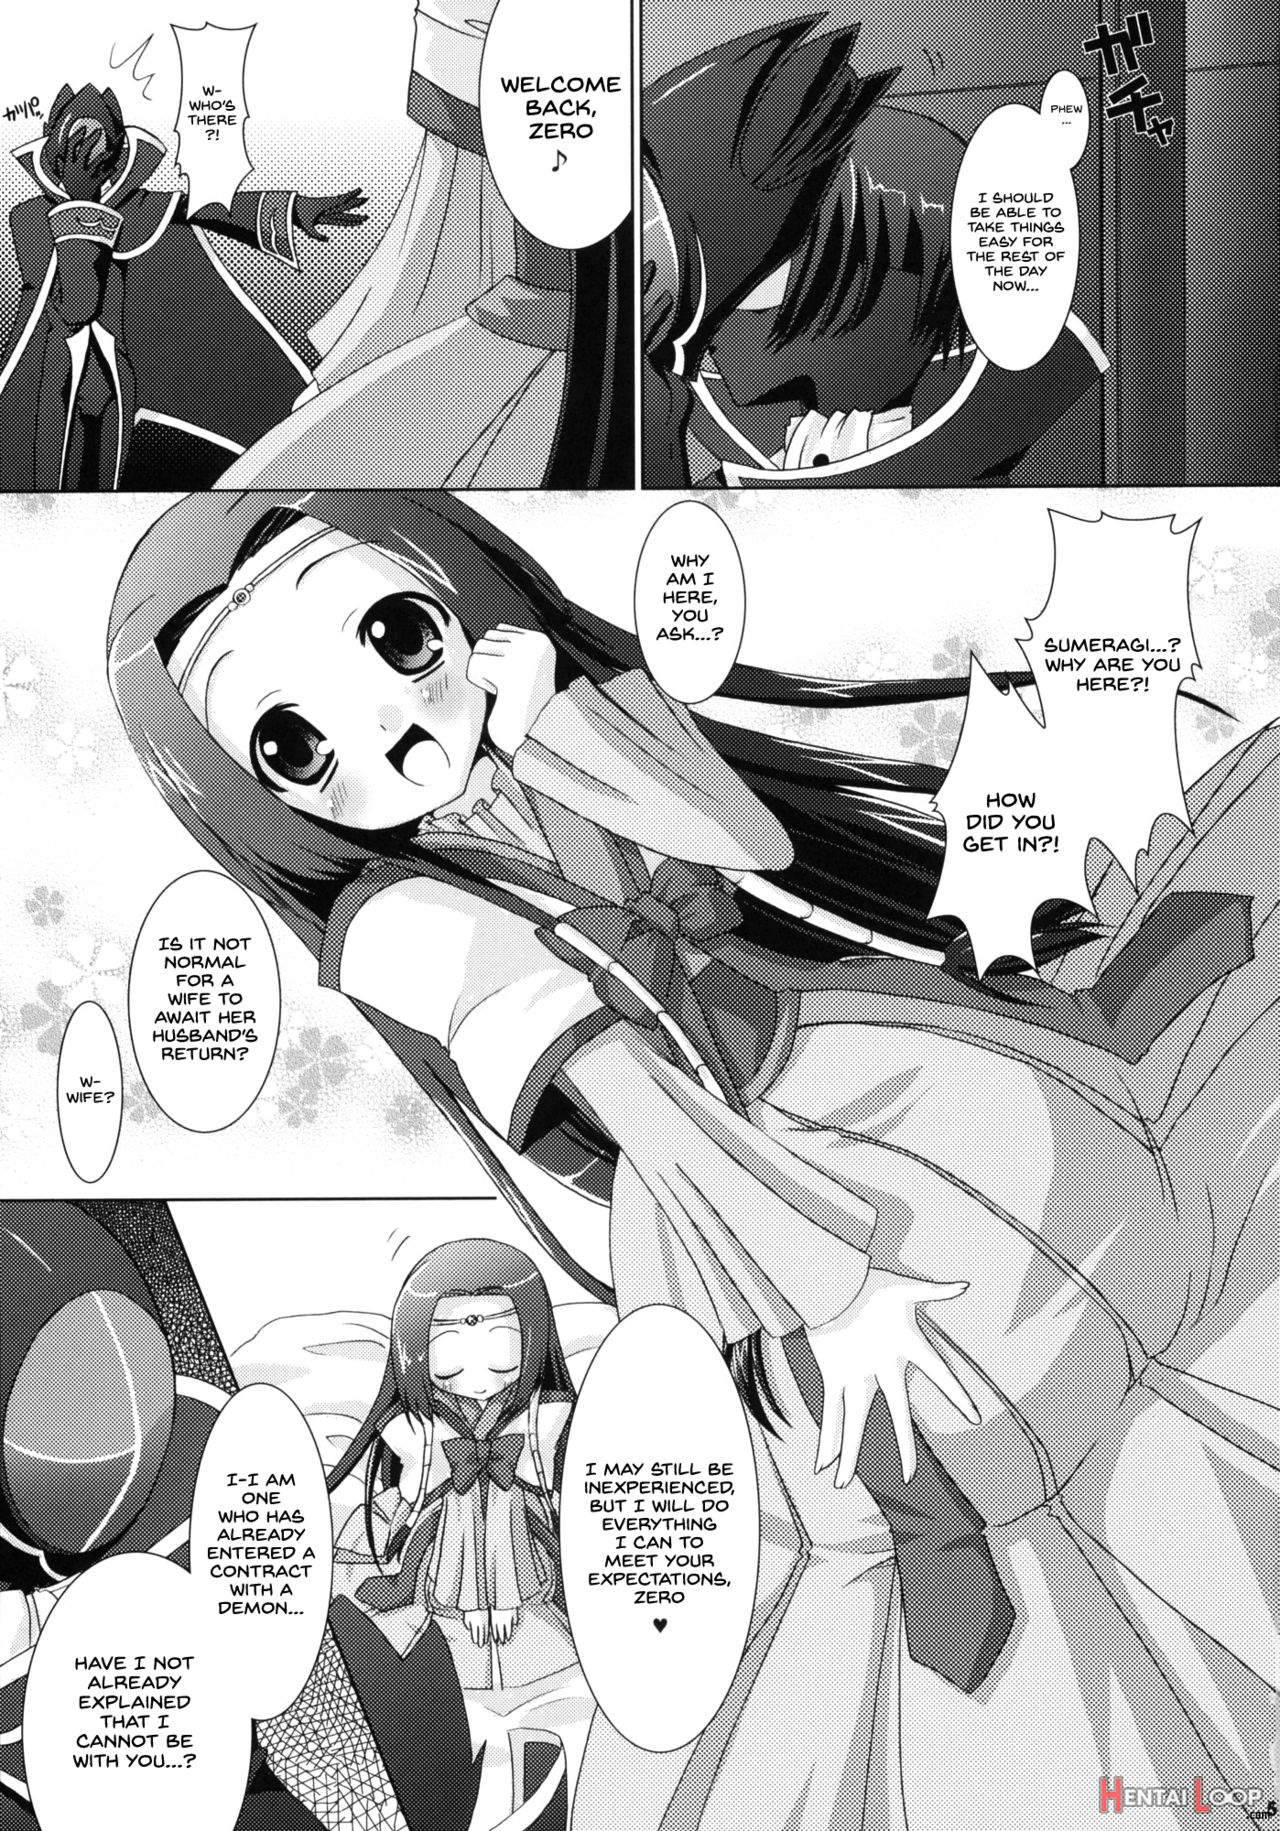 Kouhime Kyouhime page 5